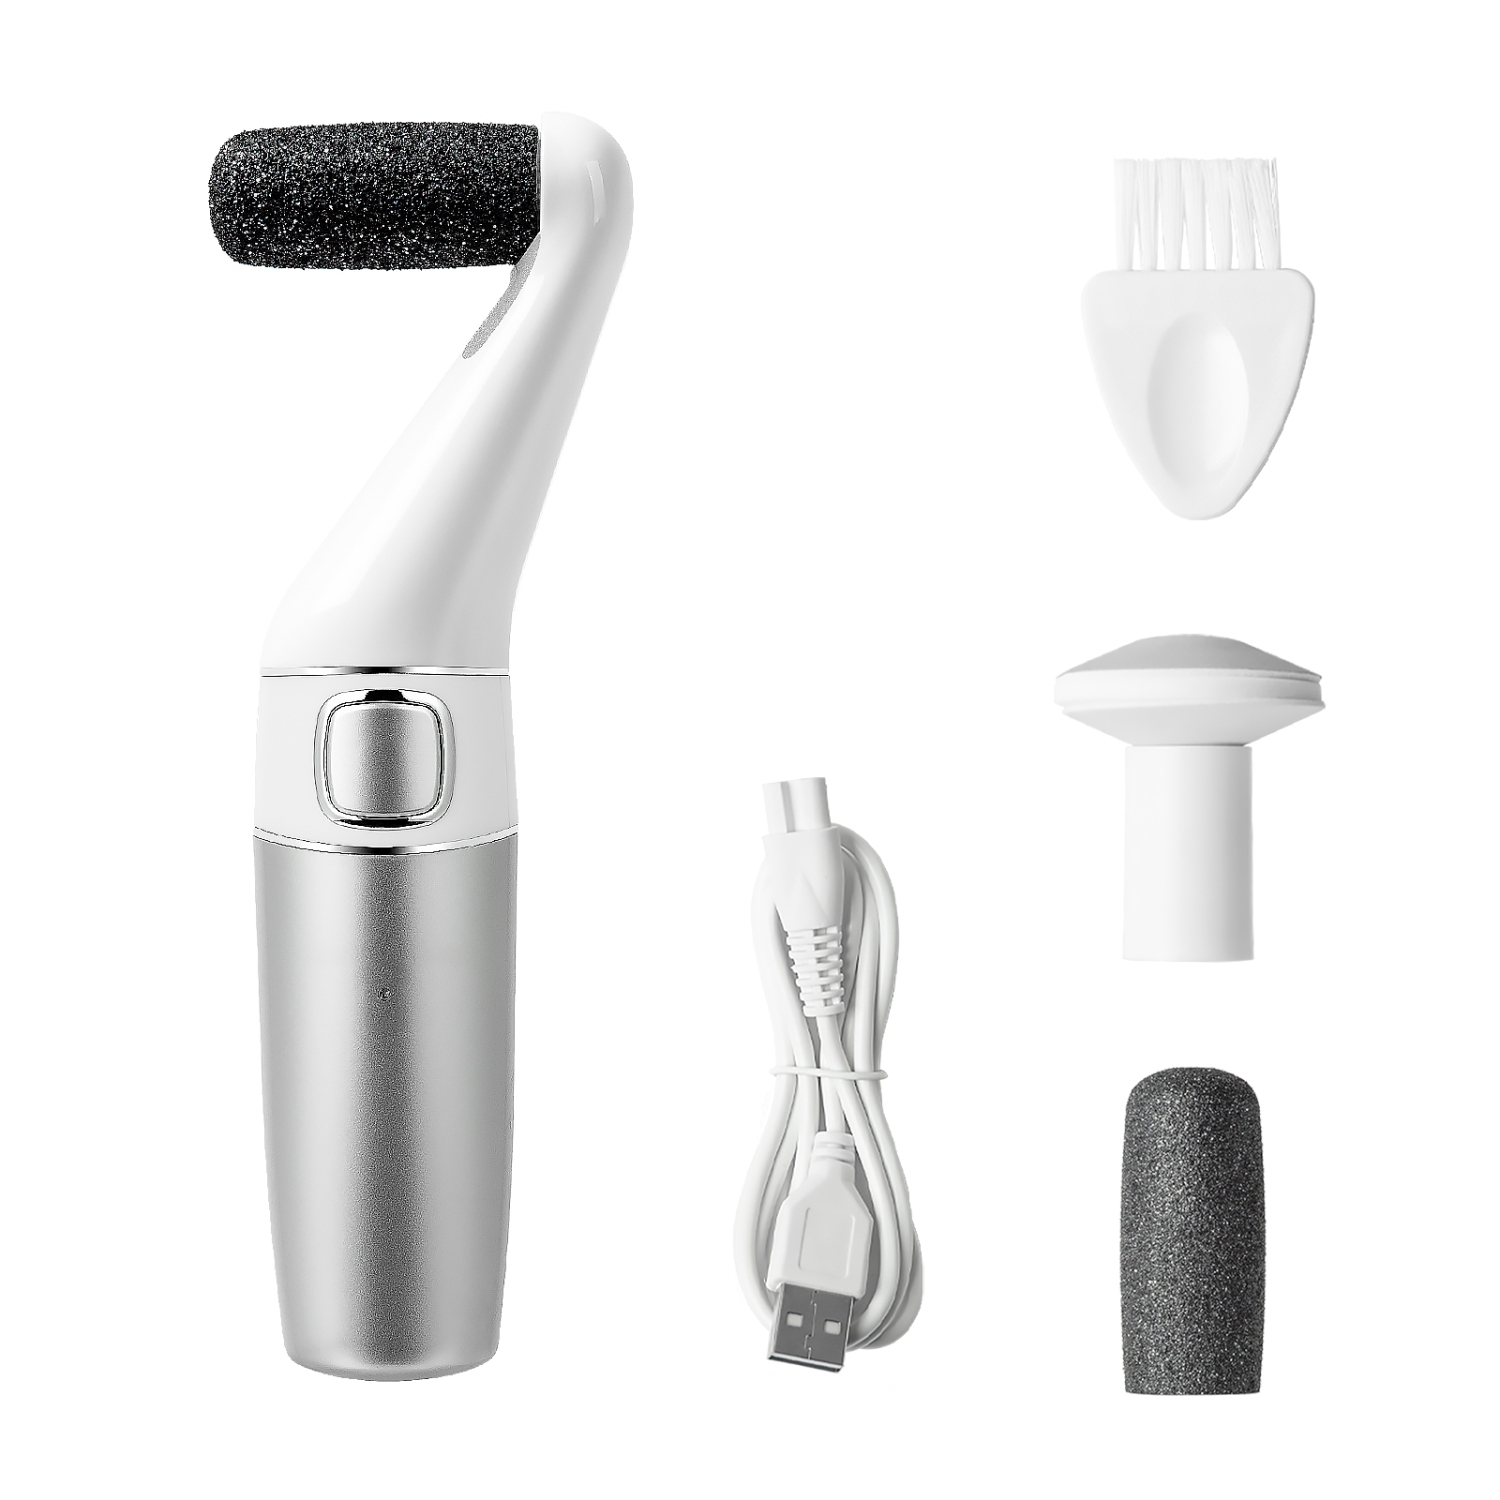 VENTRAY HOME Rechargeable Electric Foot File Callus Remover, 2 Speeds, For Dead Hard Cracked